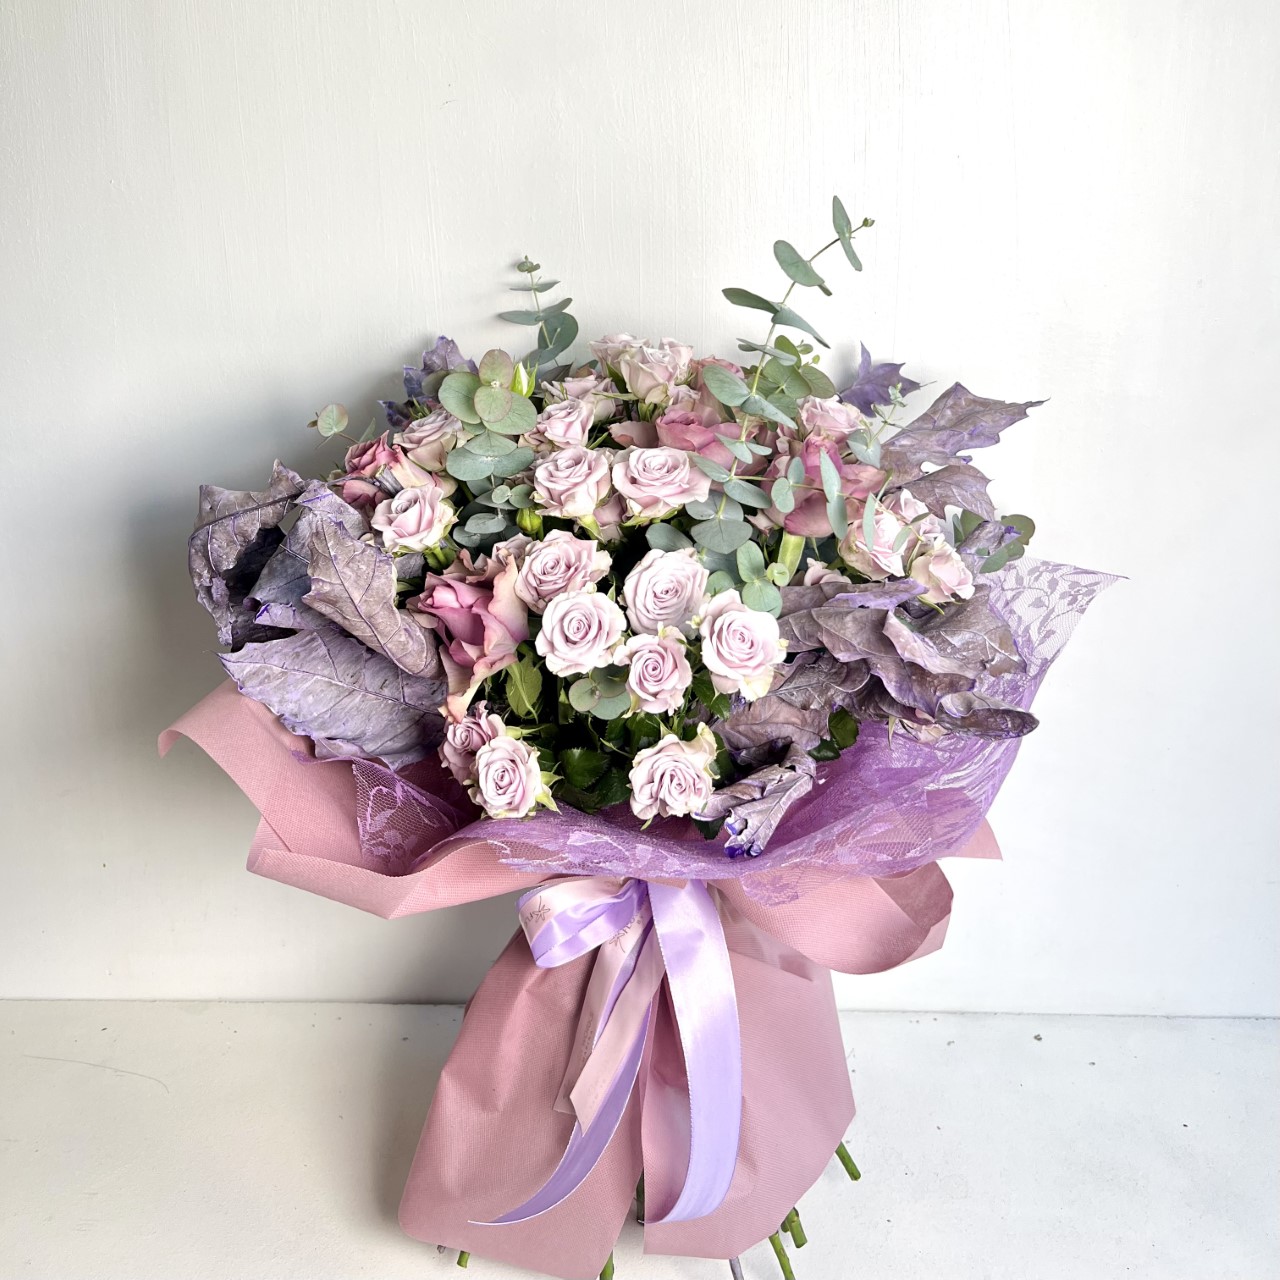 HUGE PURPLE COMBINATION OF MINI ROSES ROSES AND GREENERY